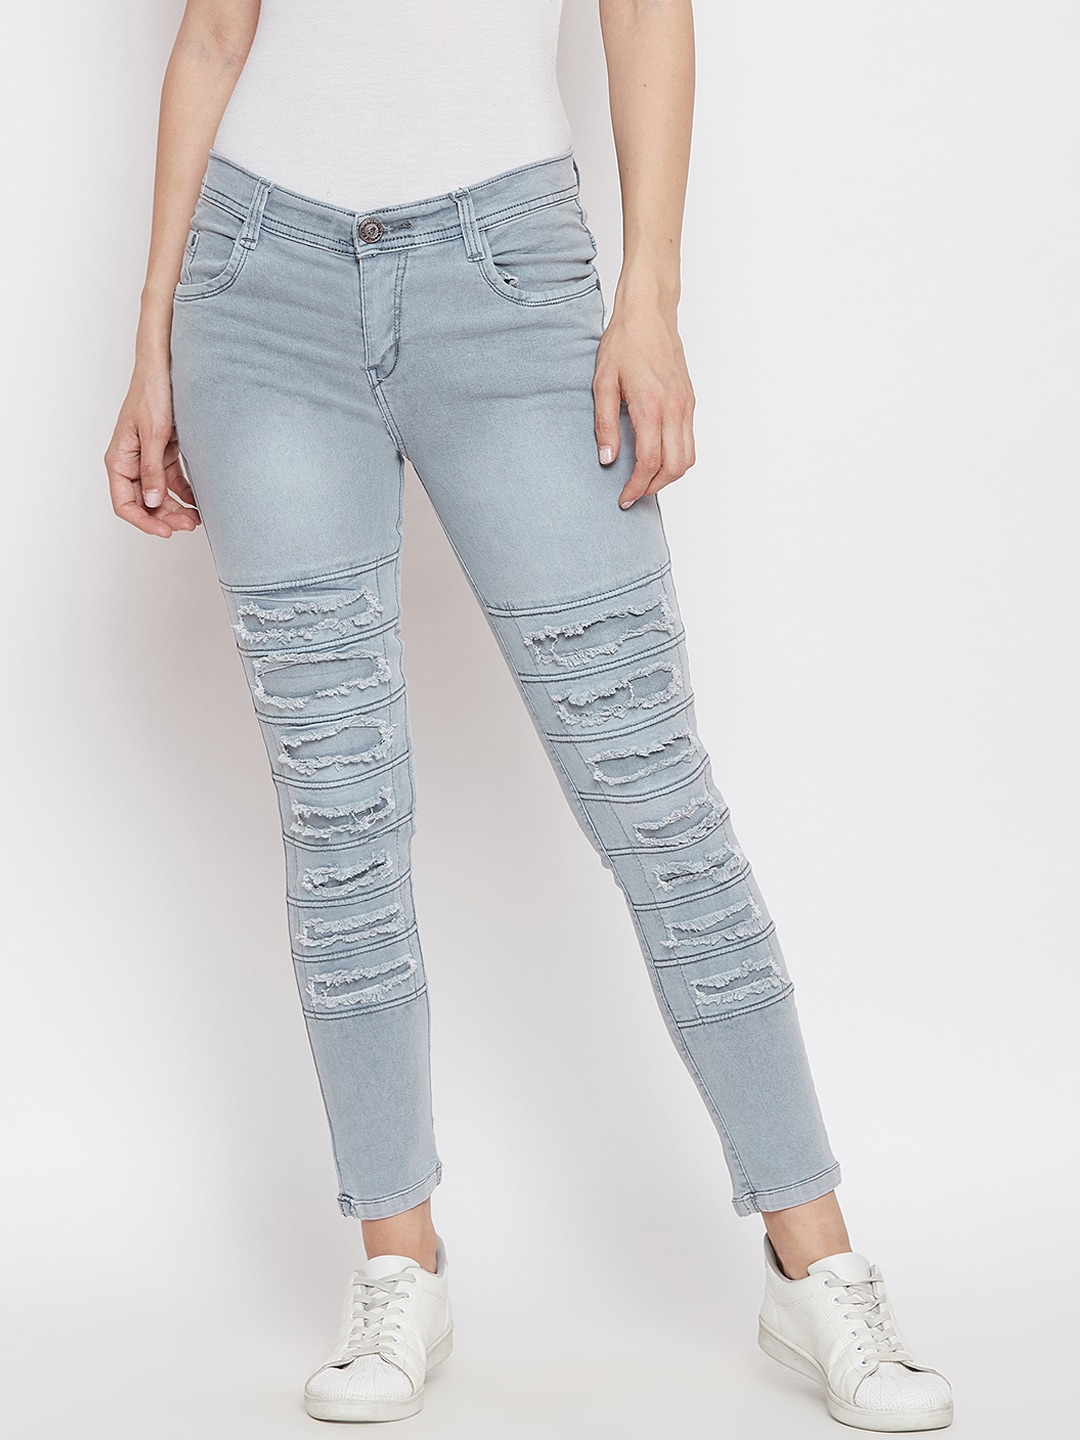 Nifty Women Grey Slim Fit Mid-Rise Highly Distressed Stretchable Jeans Price in India